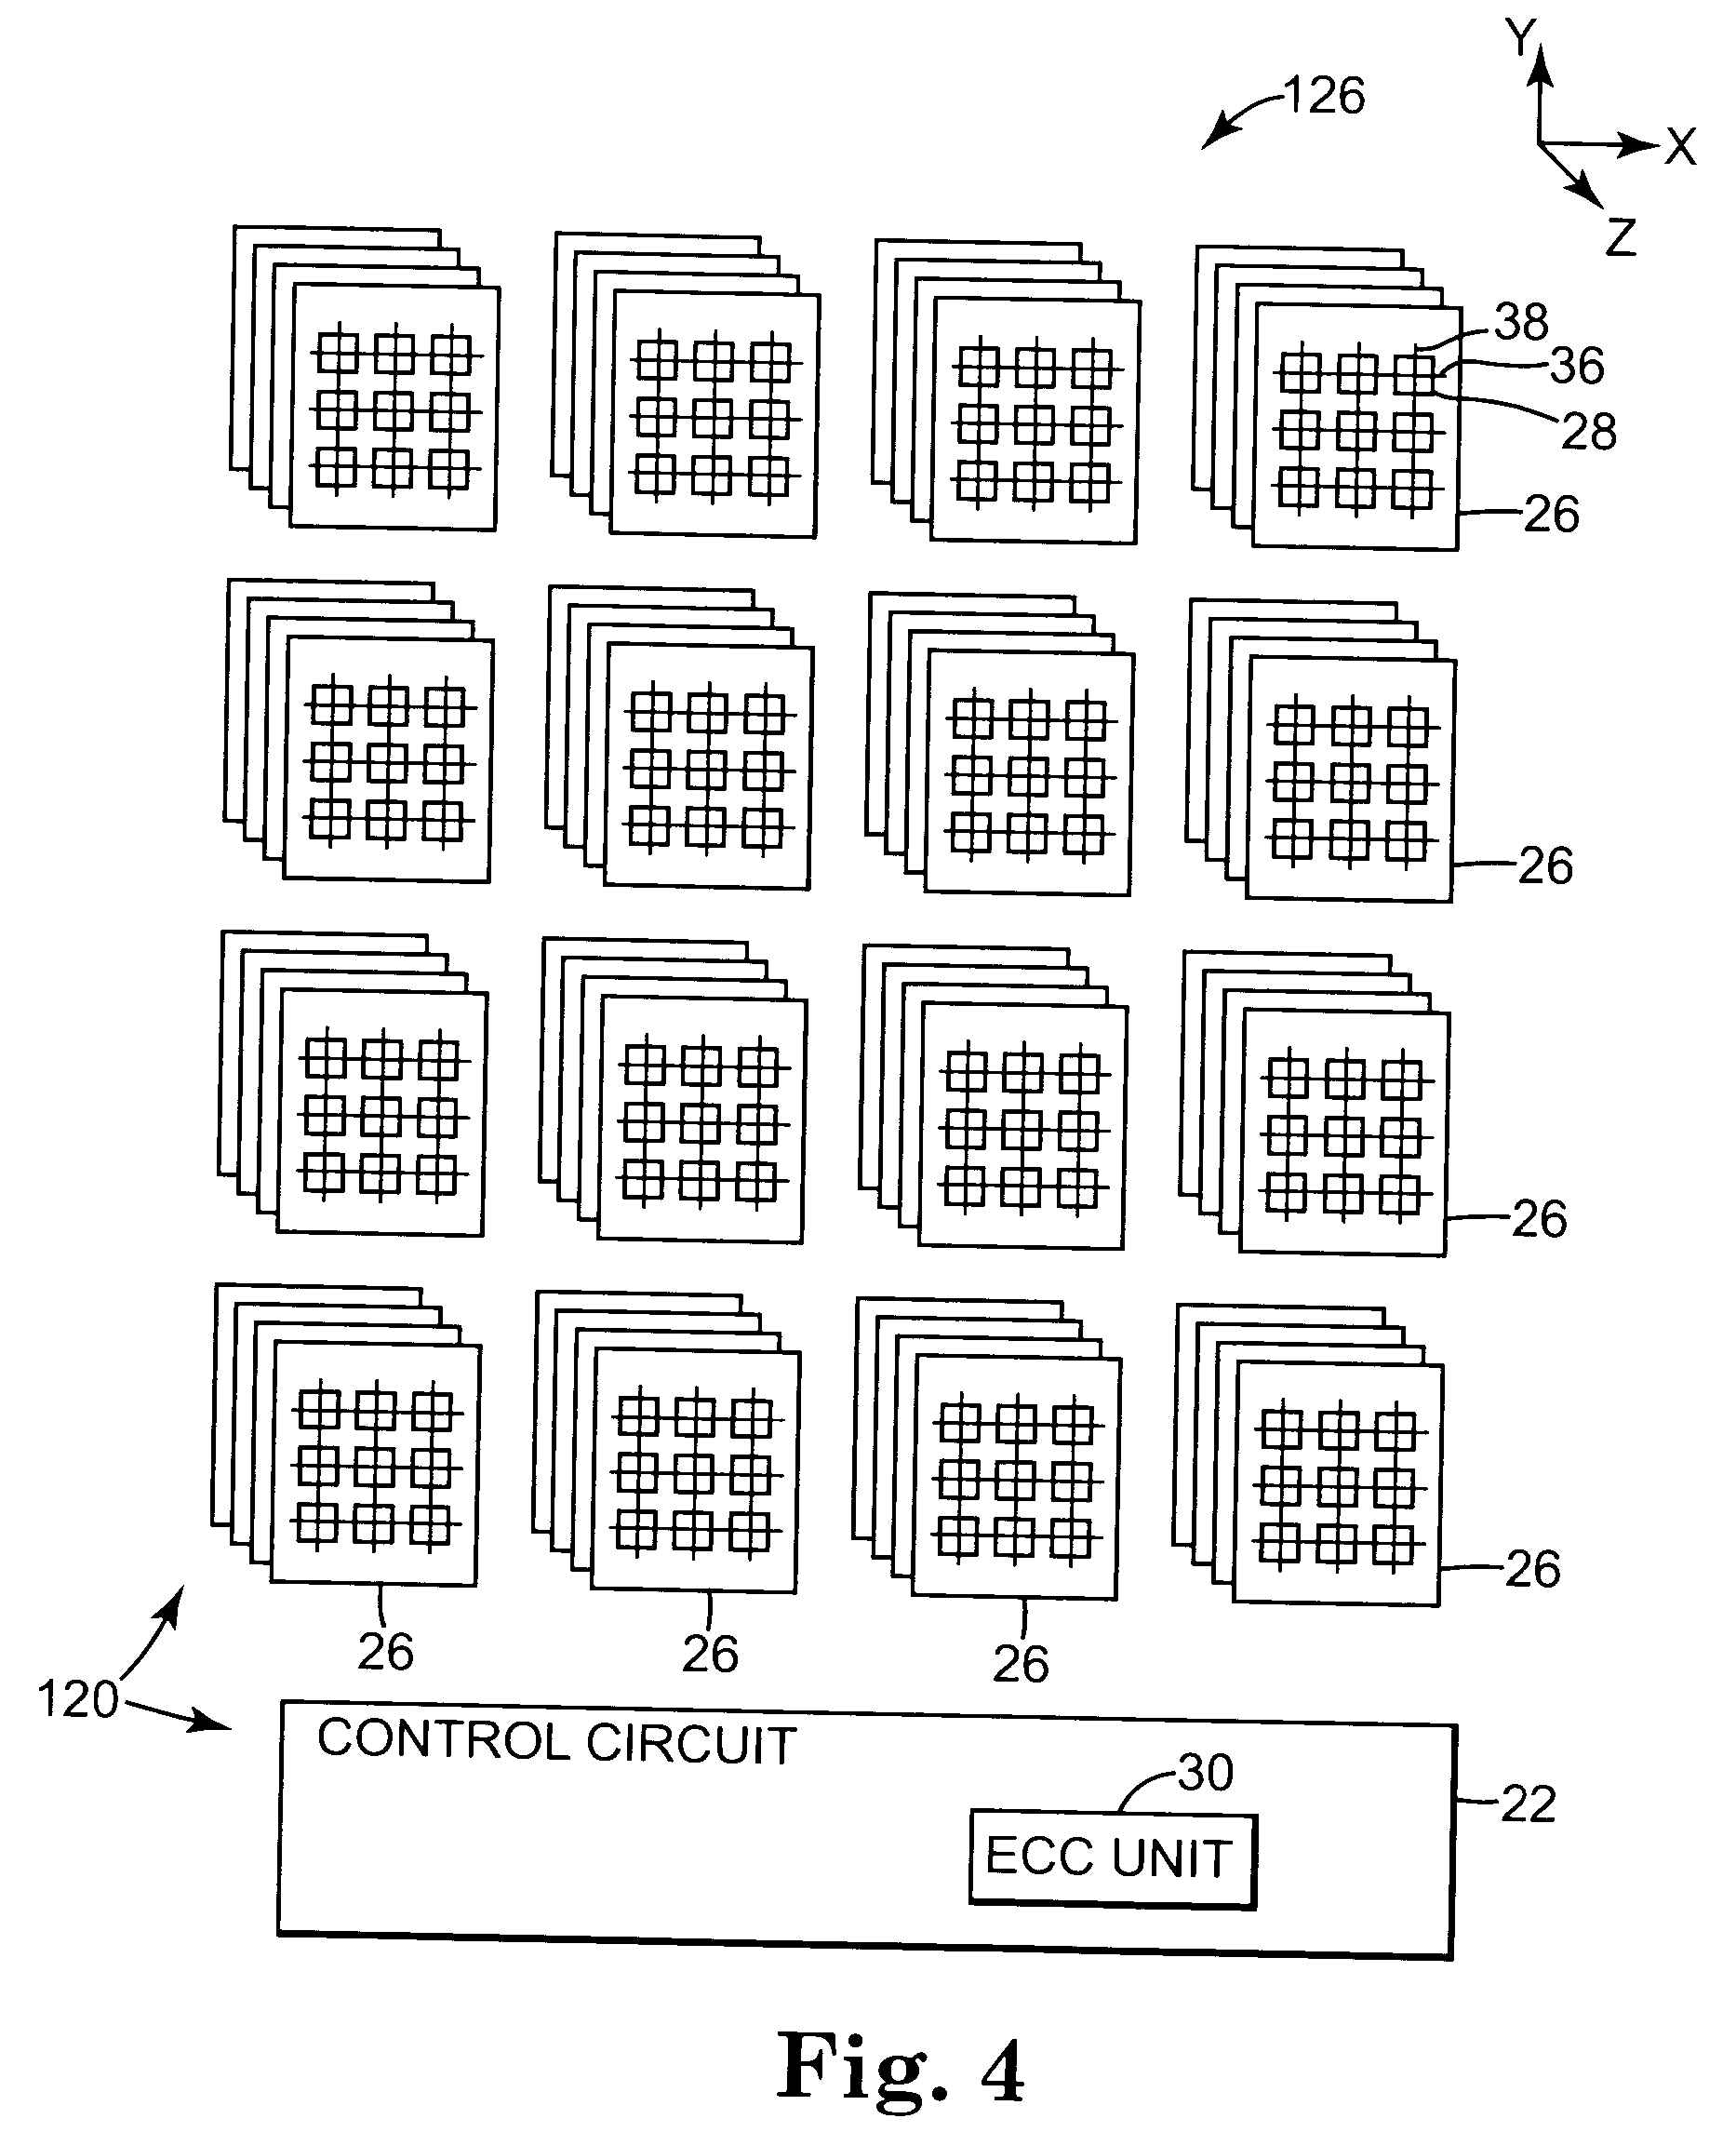 Magnetic memory with error correction coding